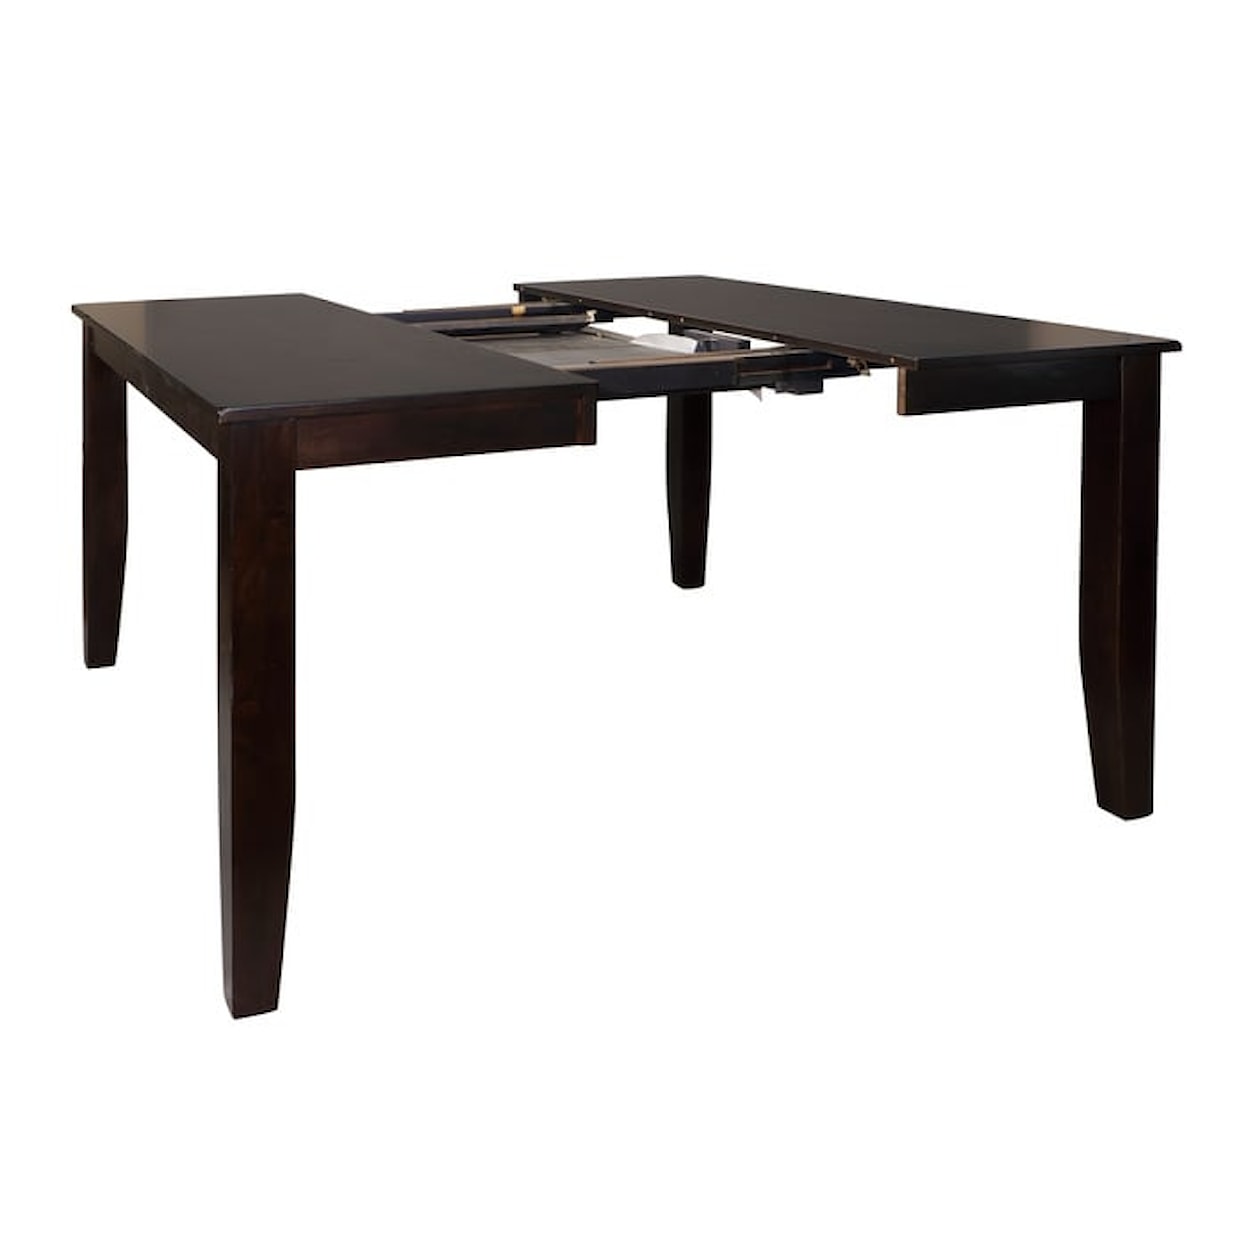 Homelegance Crown Point Counter Height Table